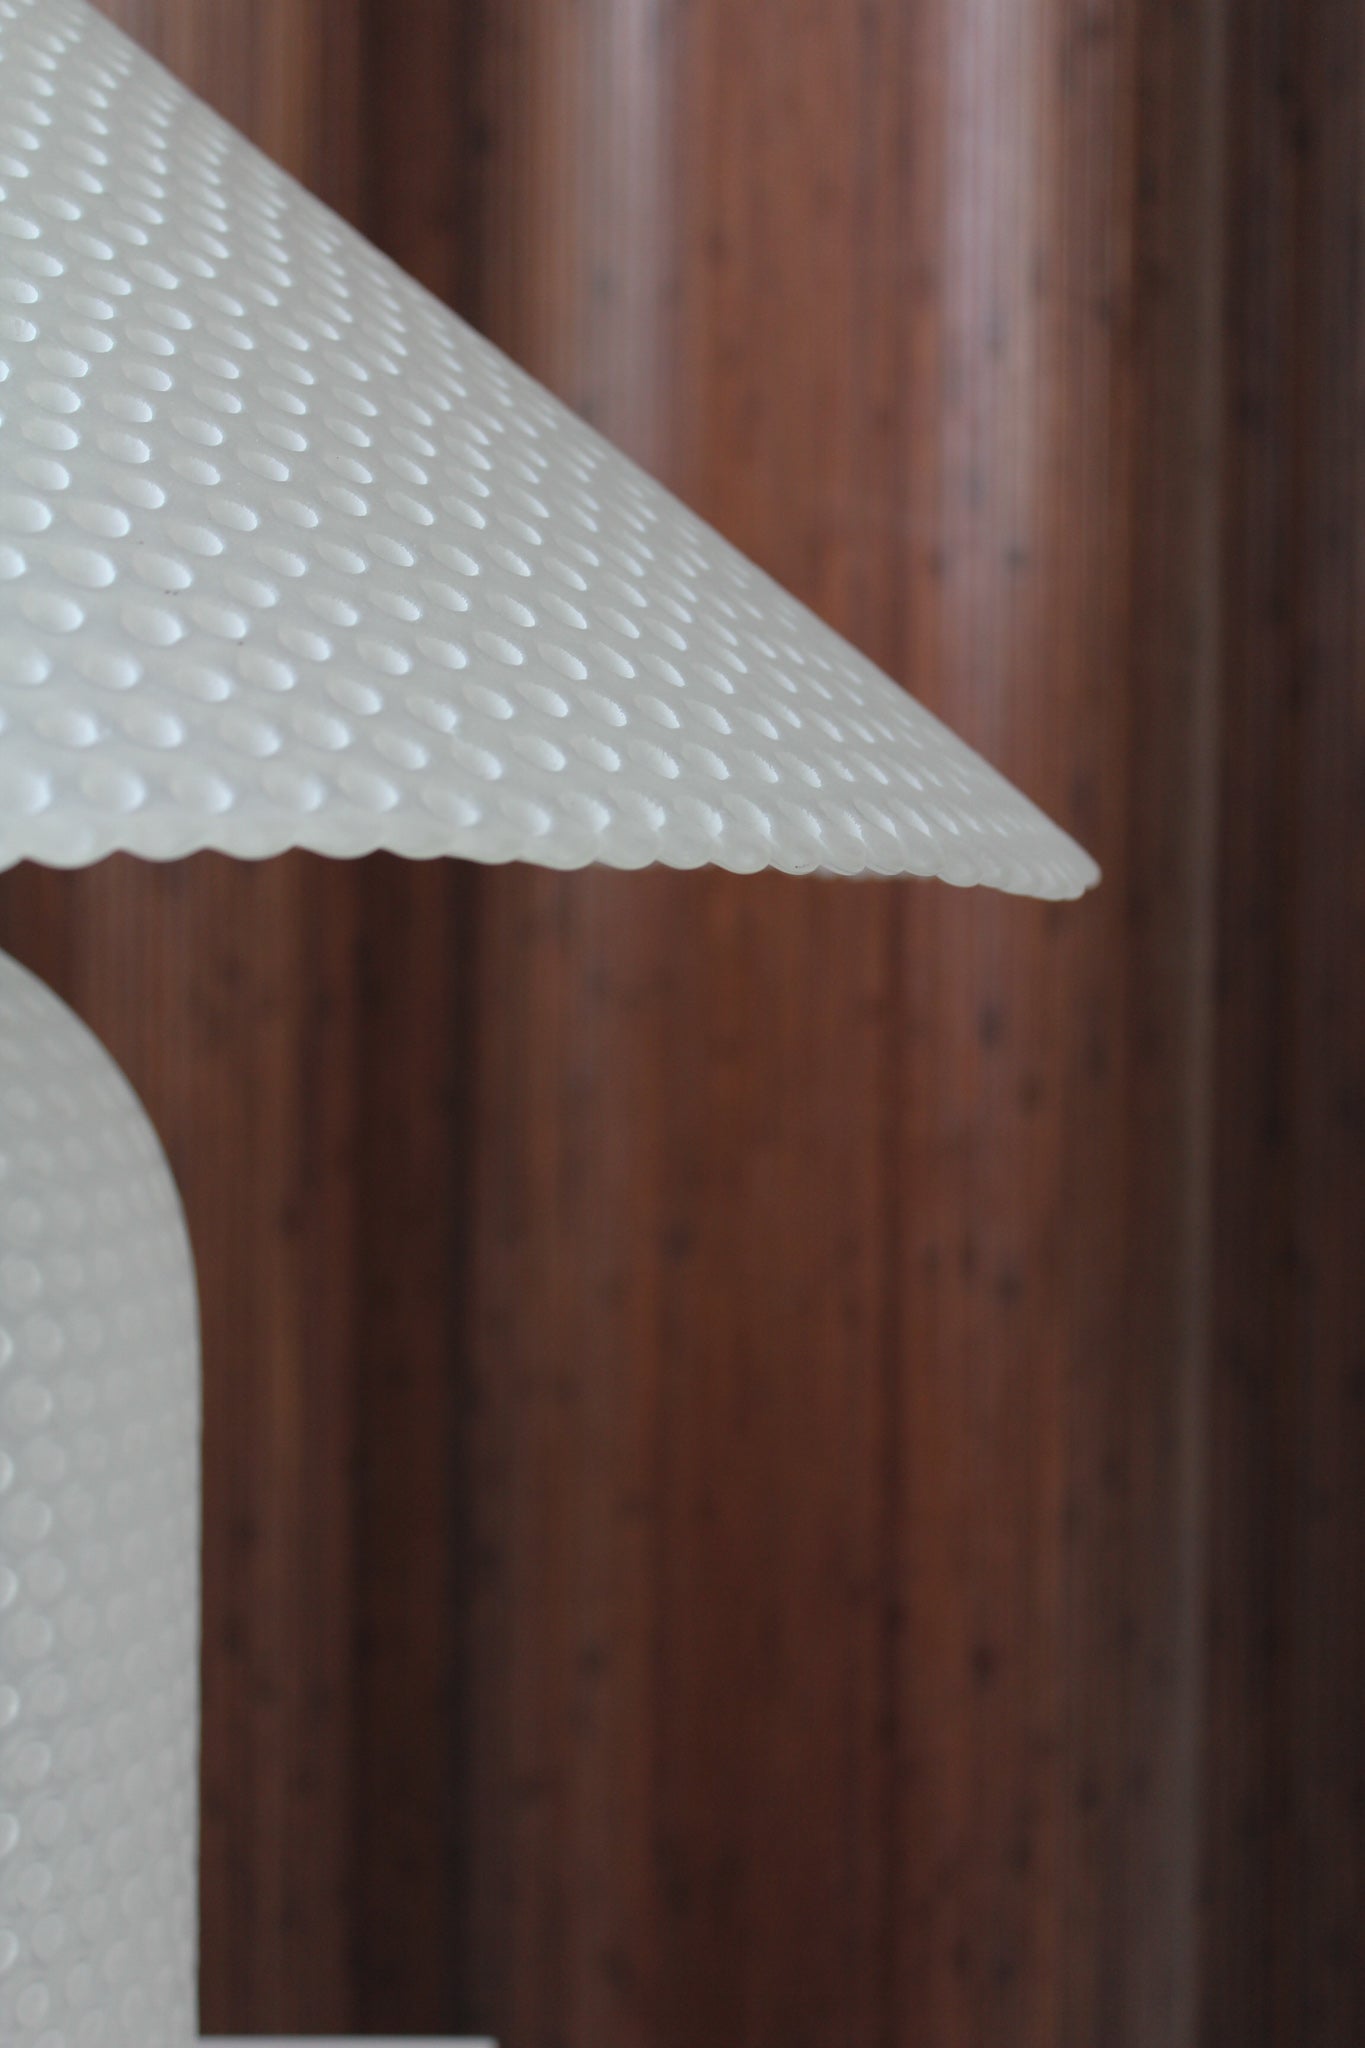 Dotted Glass Lamp